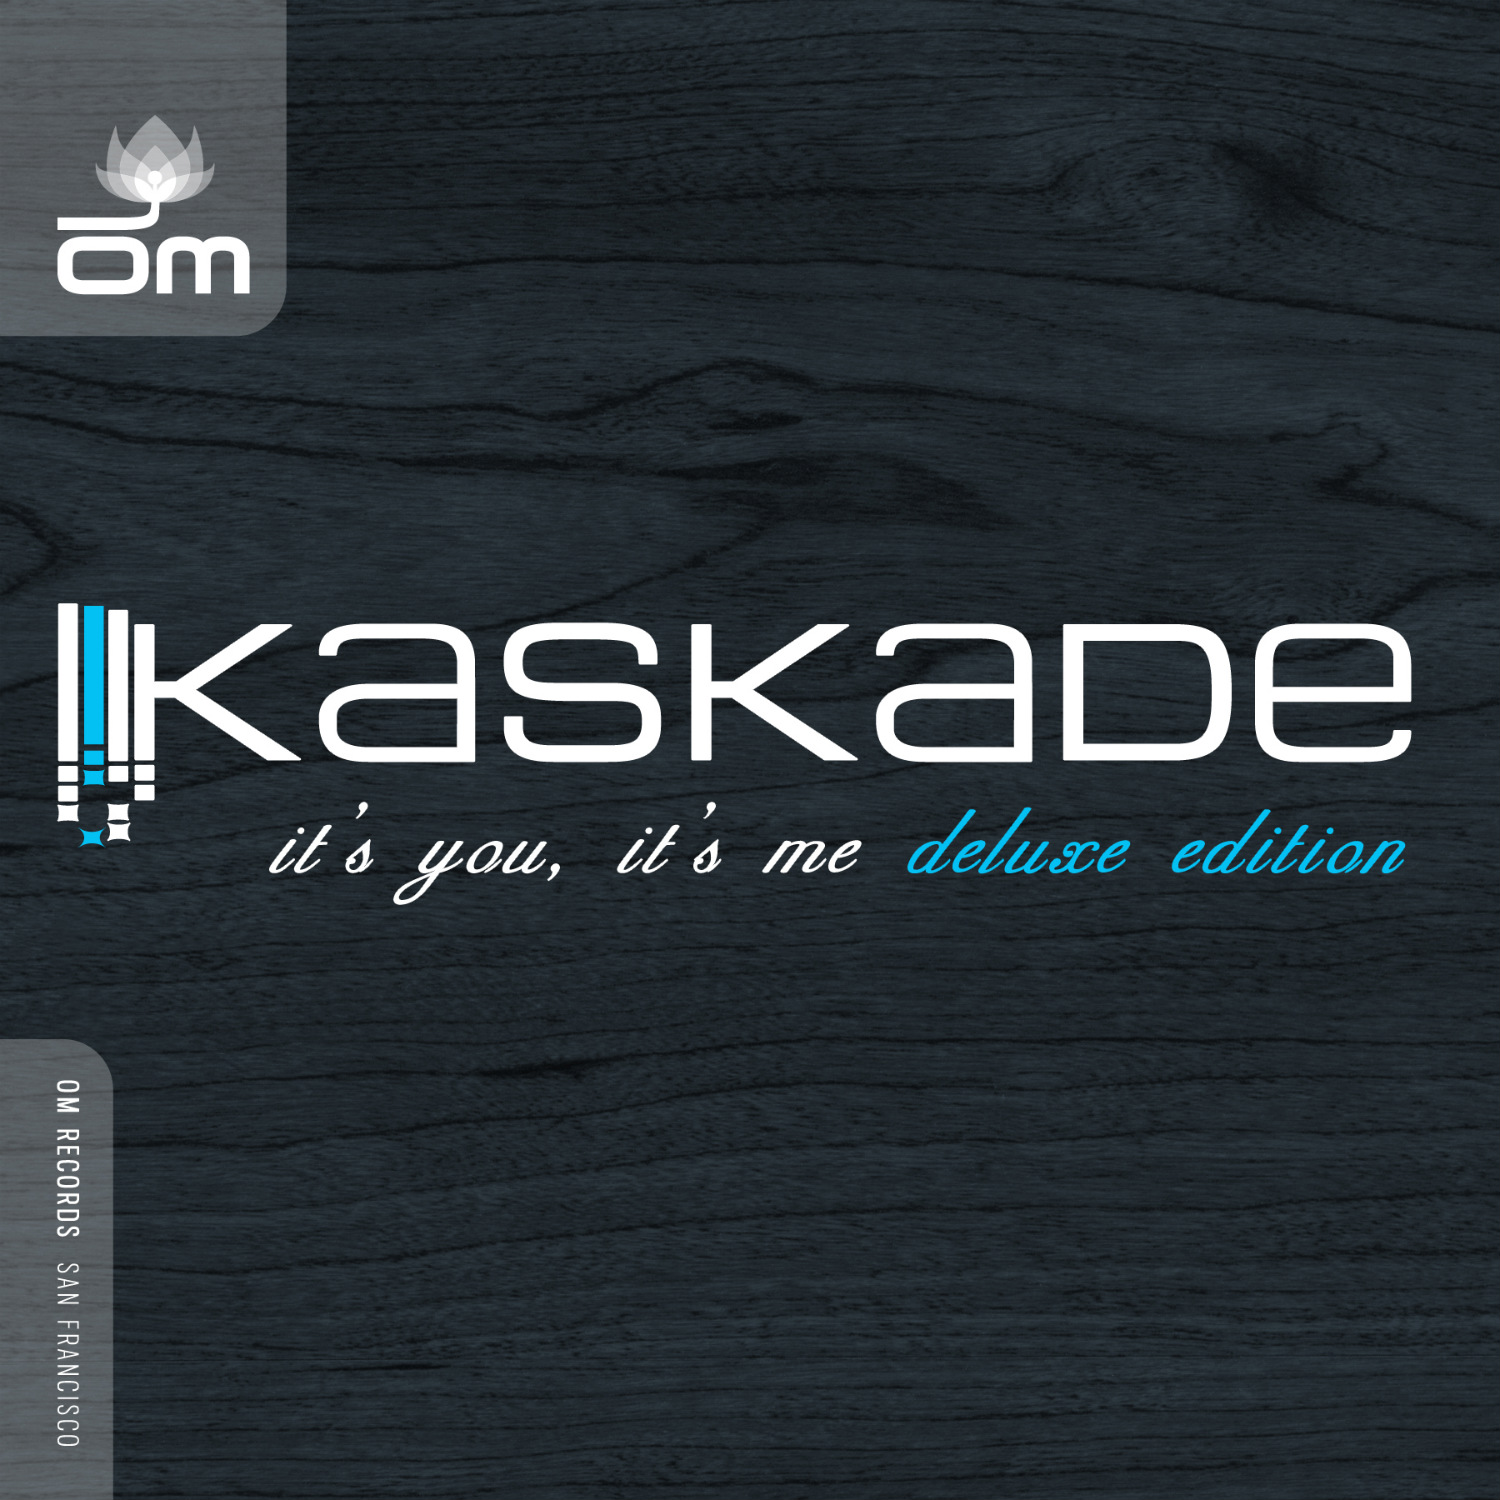 Kaskade - It's You, It's Me (Deluxe Edition)